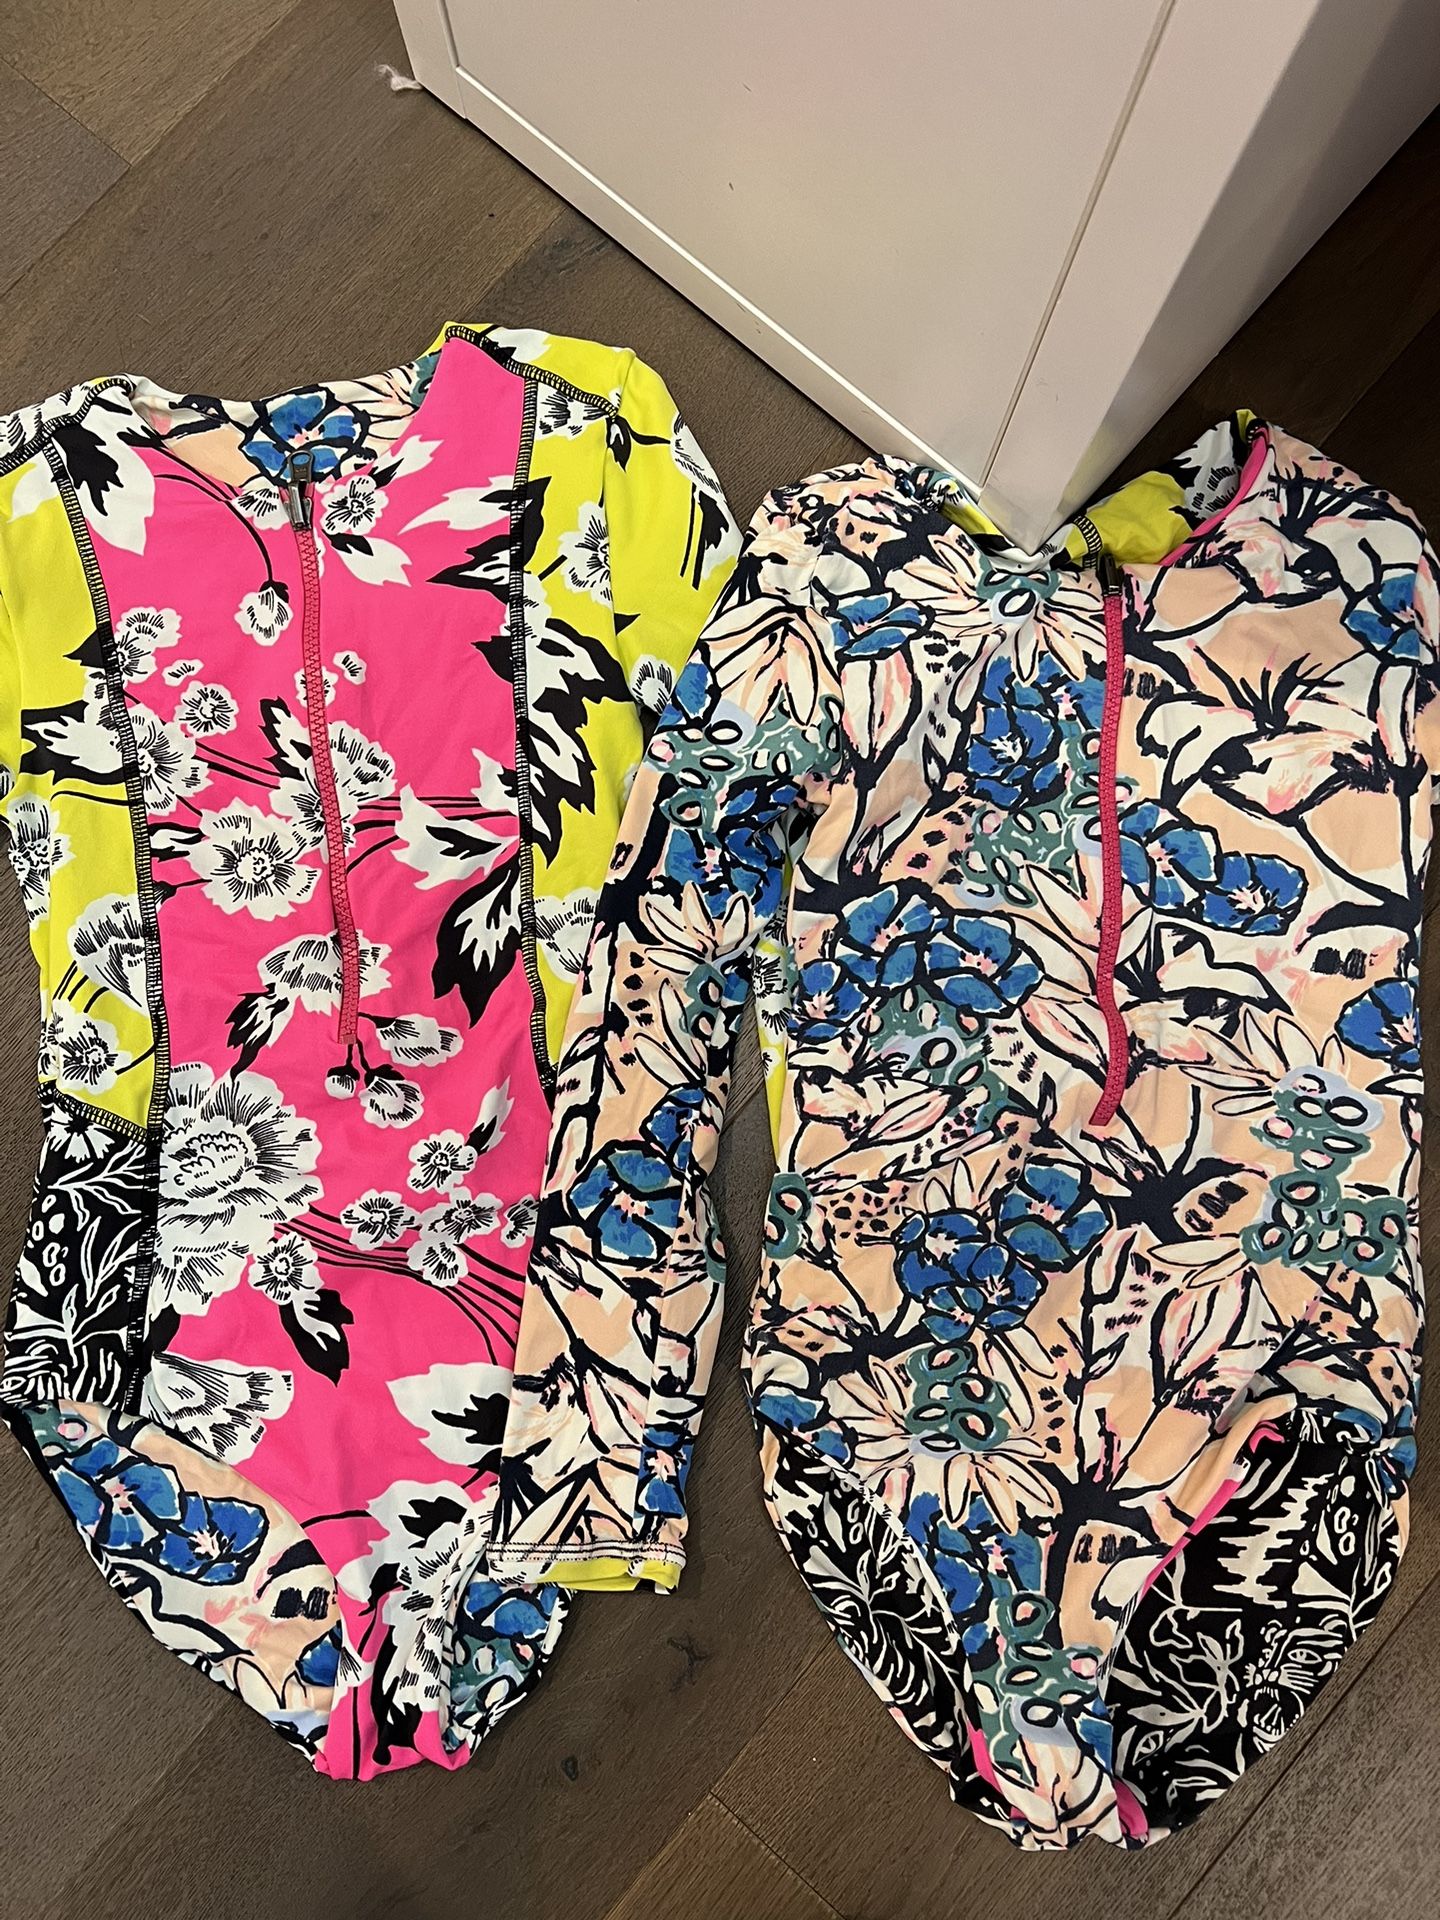 One Piece Maaji Bathing Suits. Reversible. These Are The Prints. Size 10. Have 2